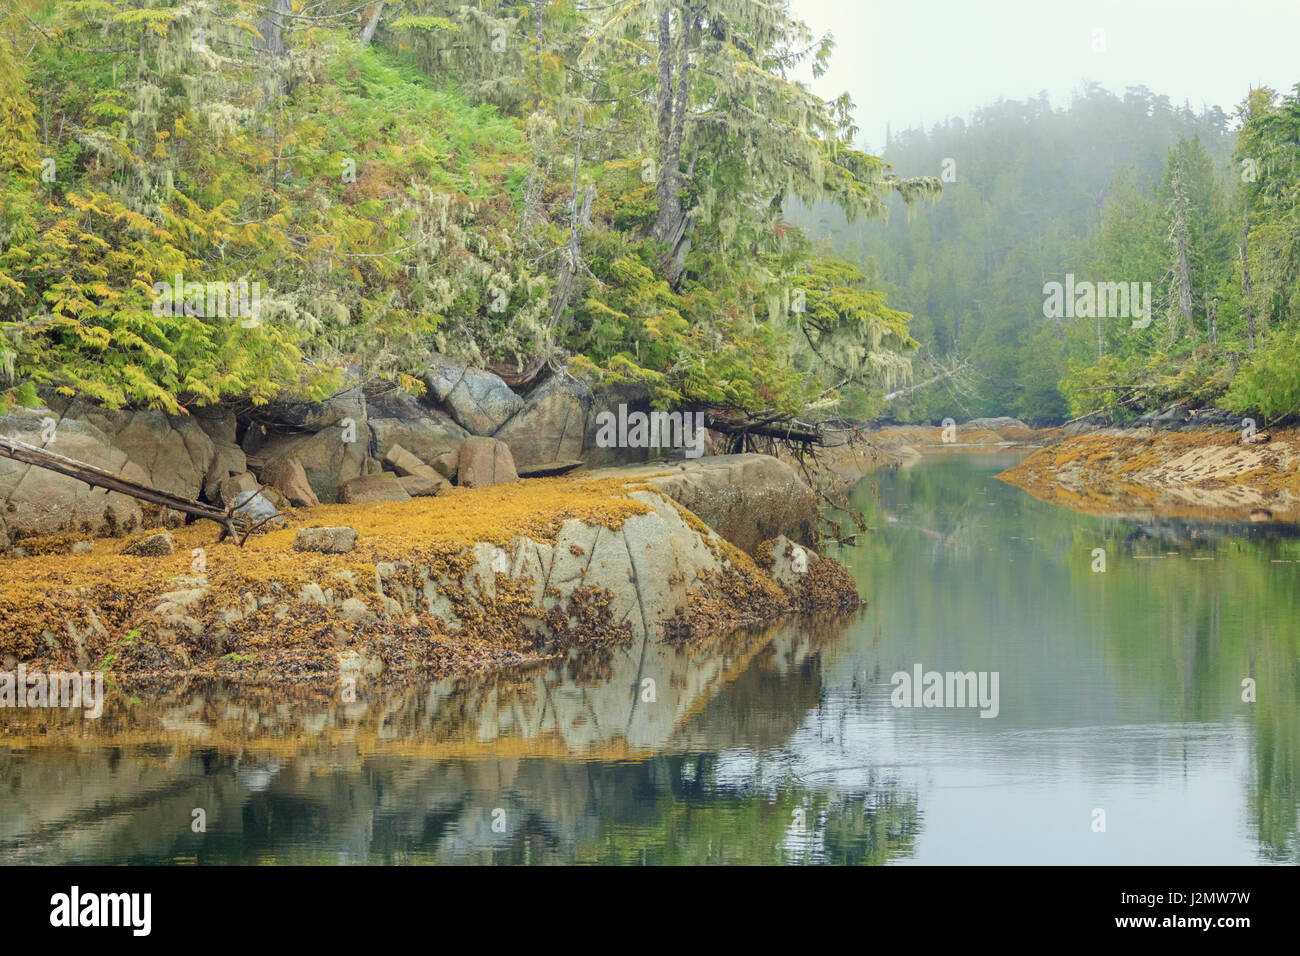 Rock and seaweeds on the shoreline are reflected in the water on an overcast, misty morning in British Columbia's Great Bear Rainforest. Stock Photo